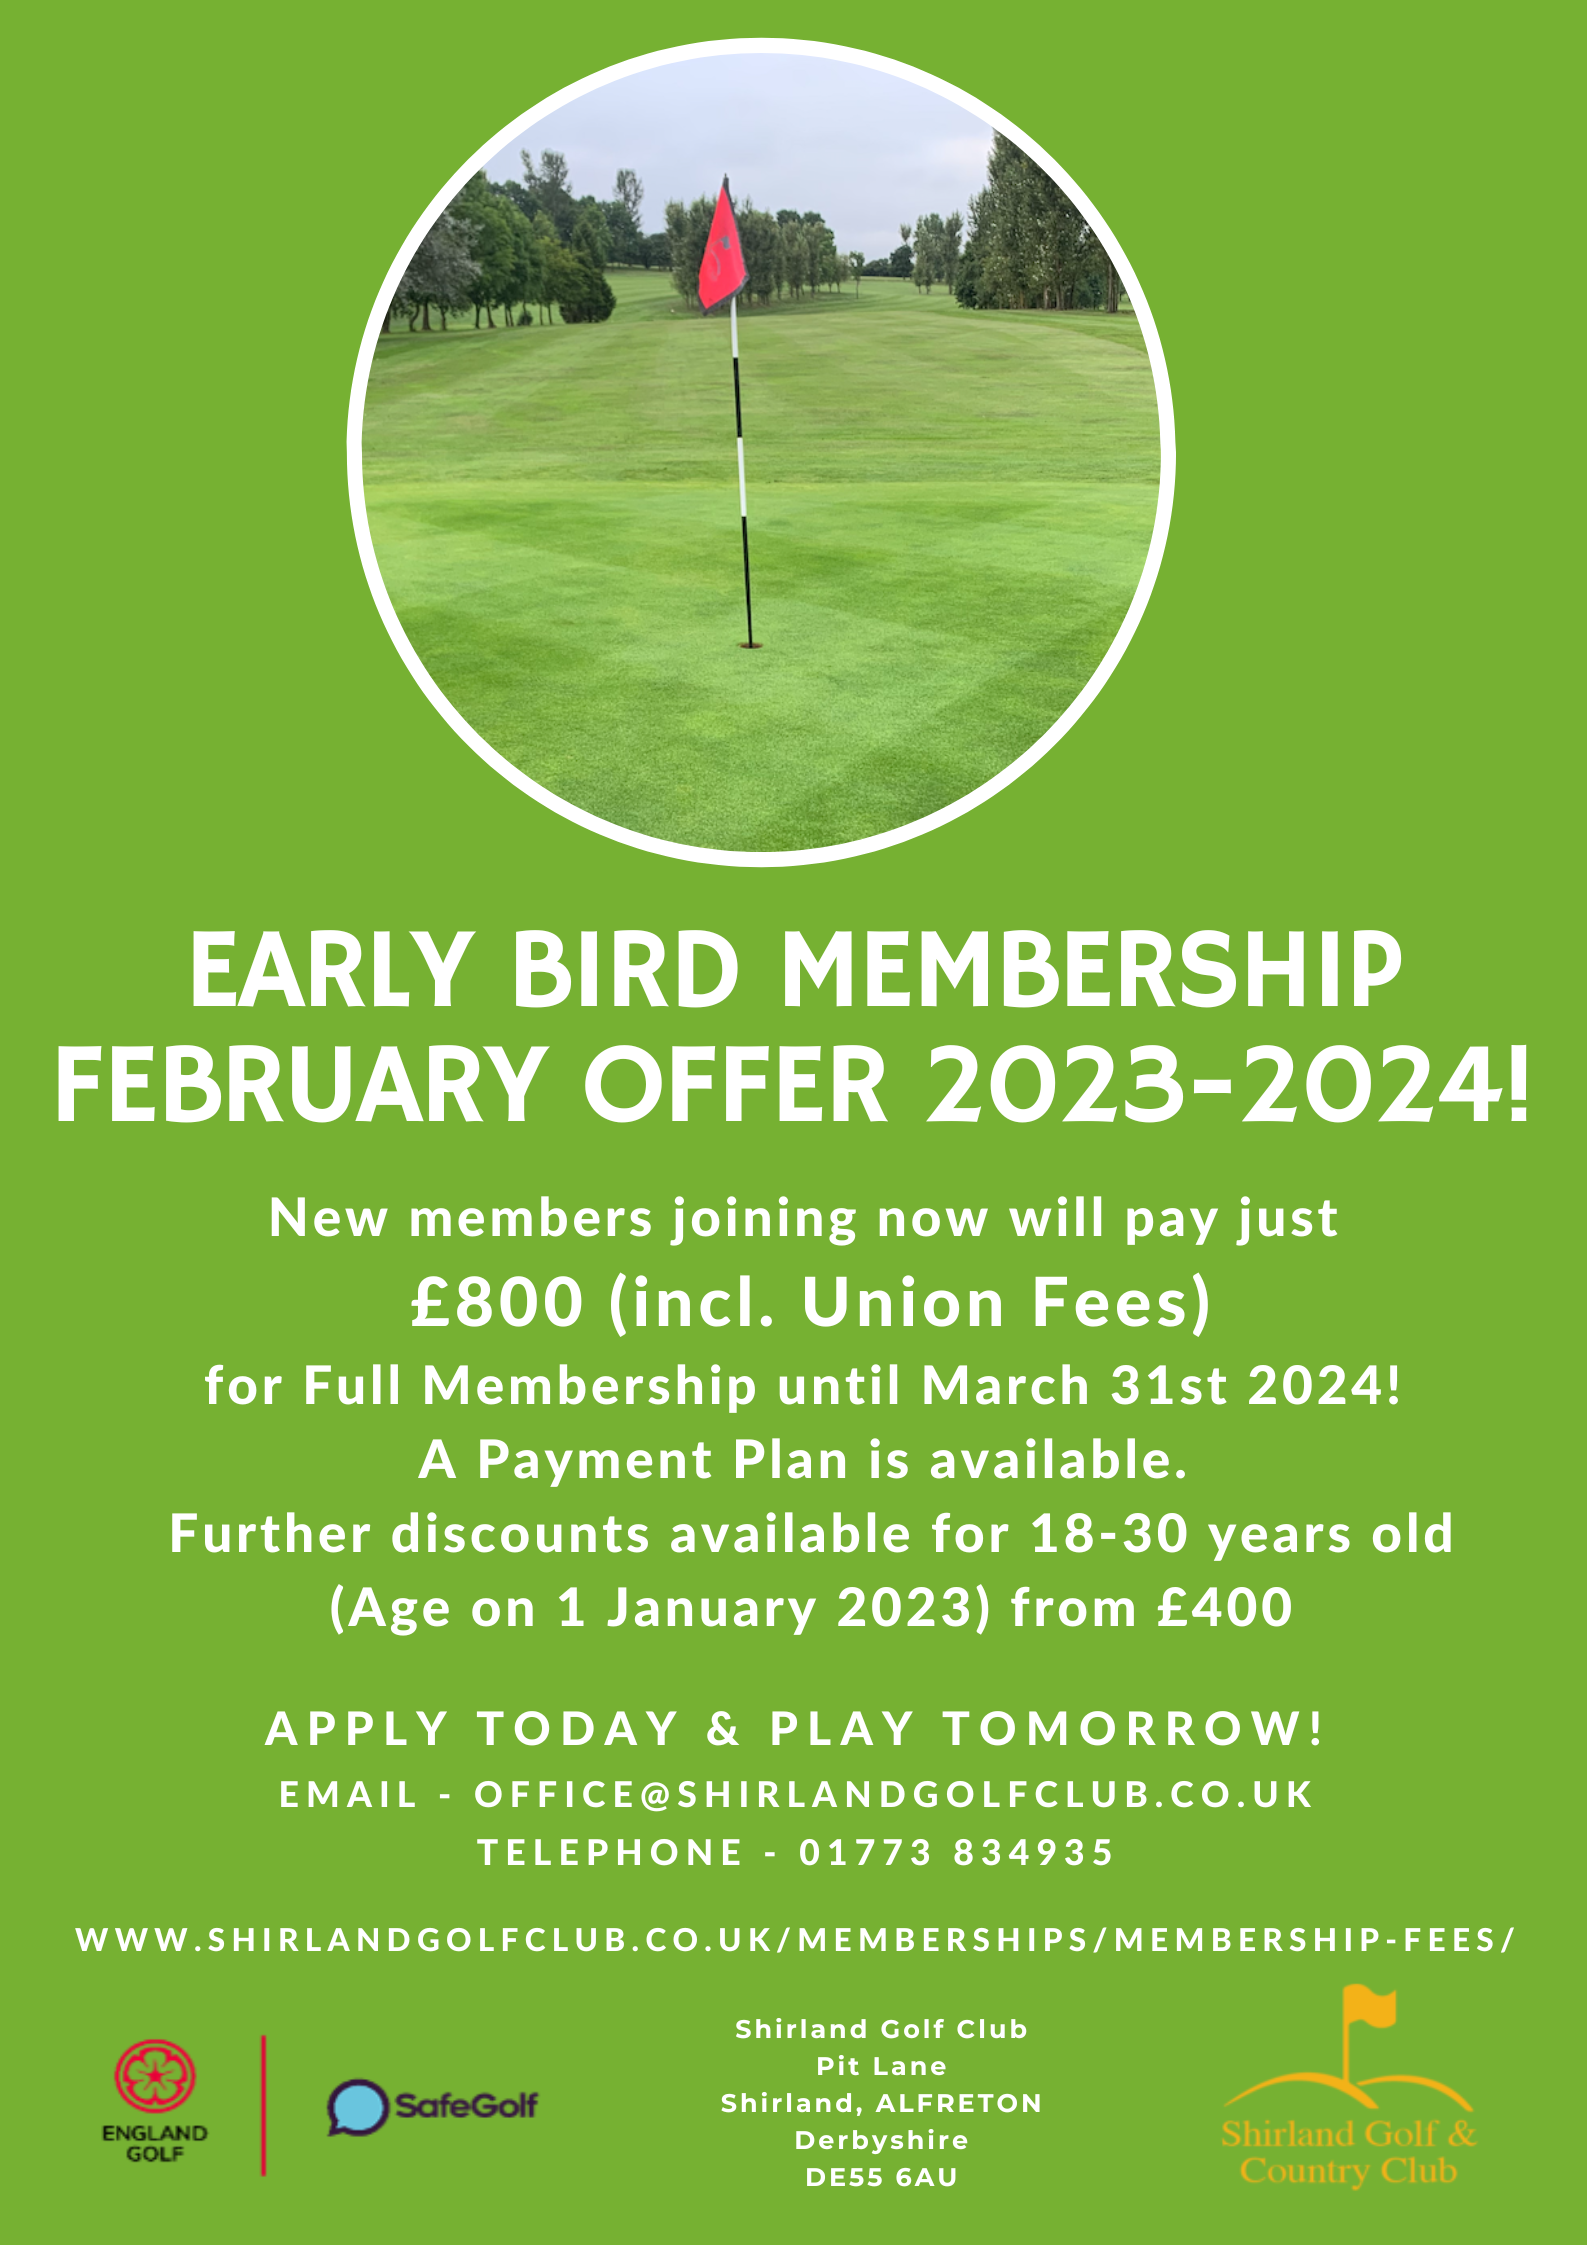 Shirland Golf Club launches membership offer for new members